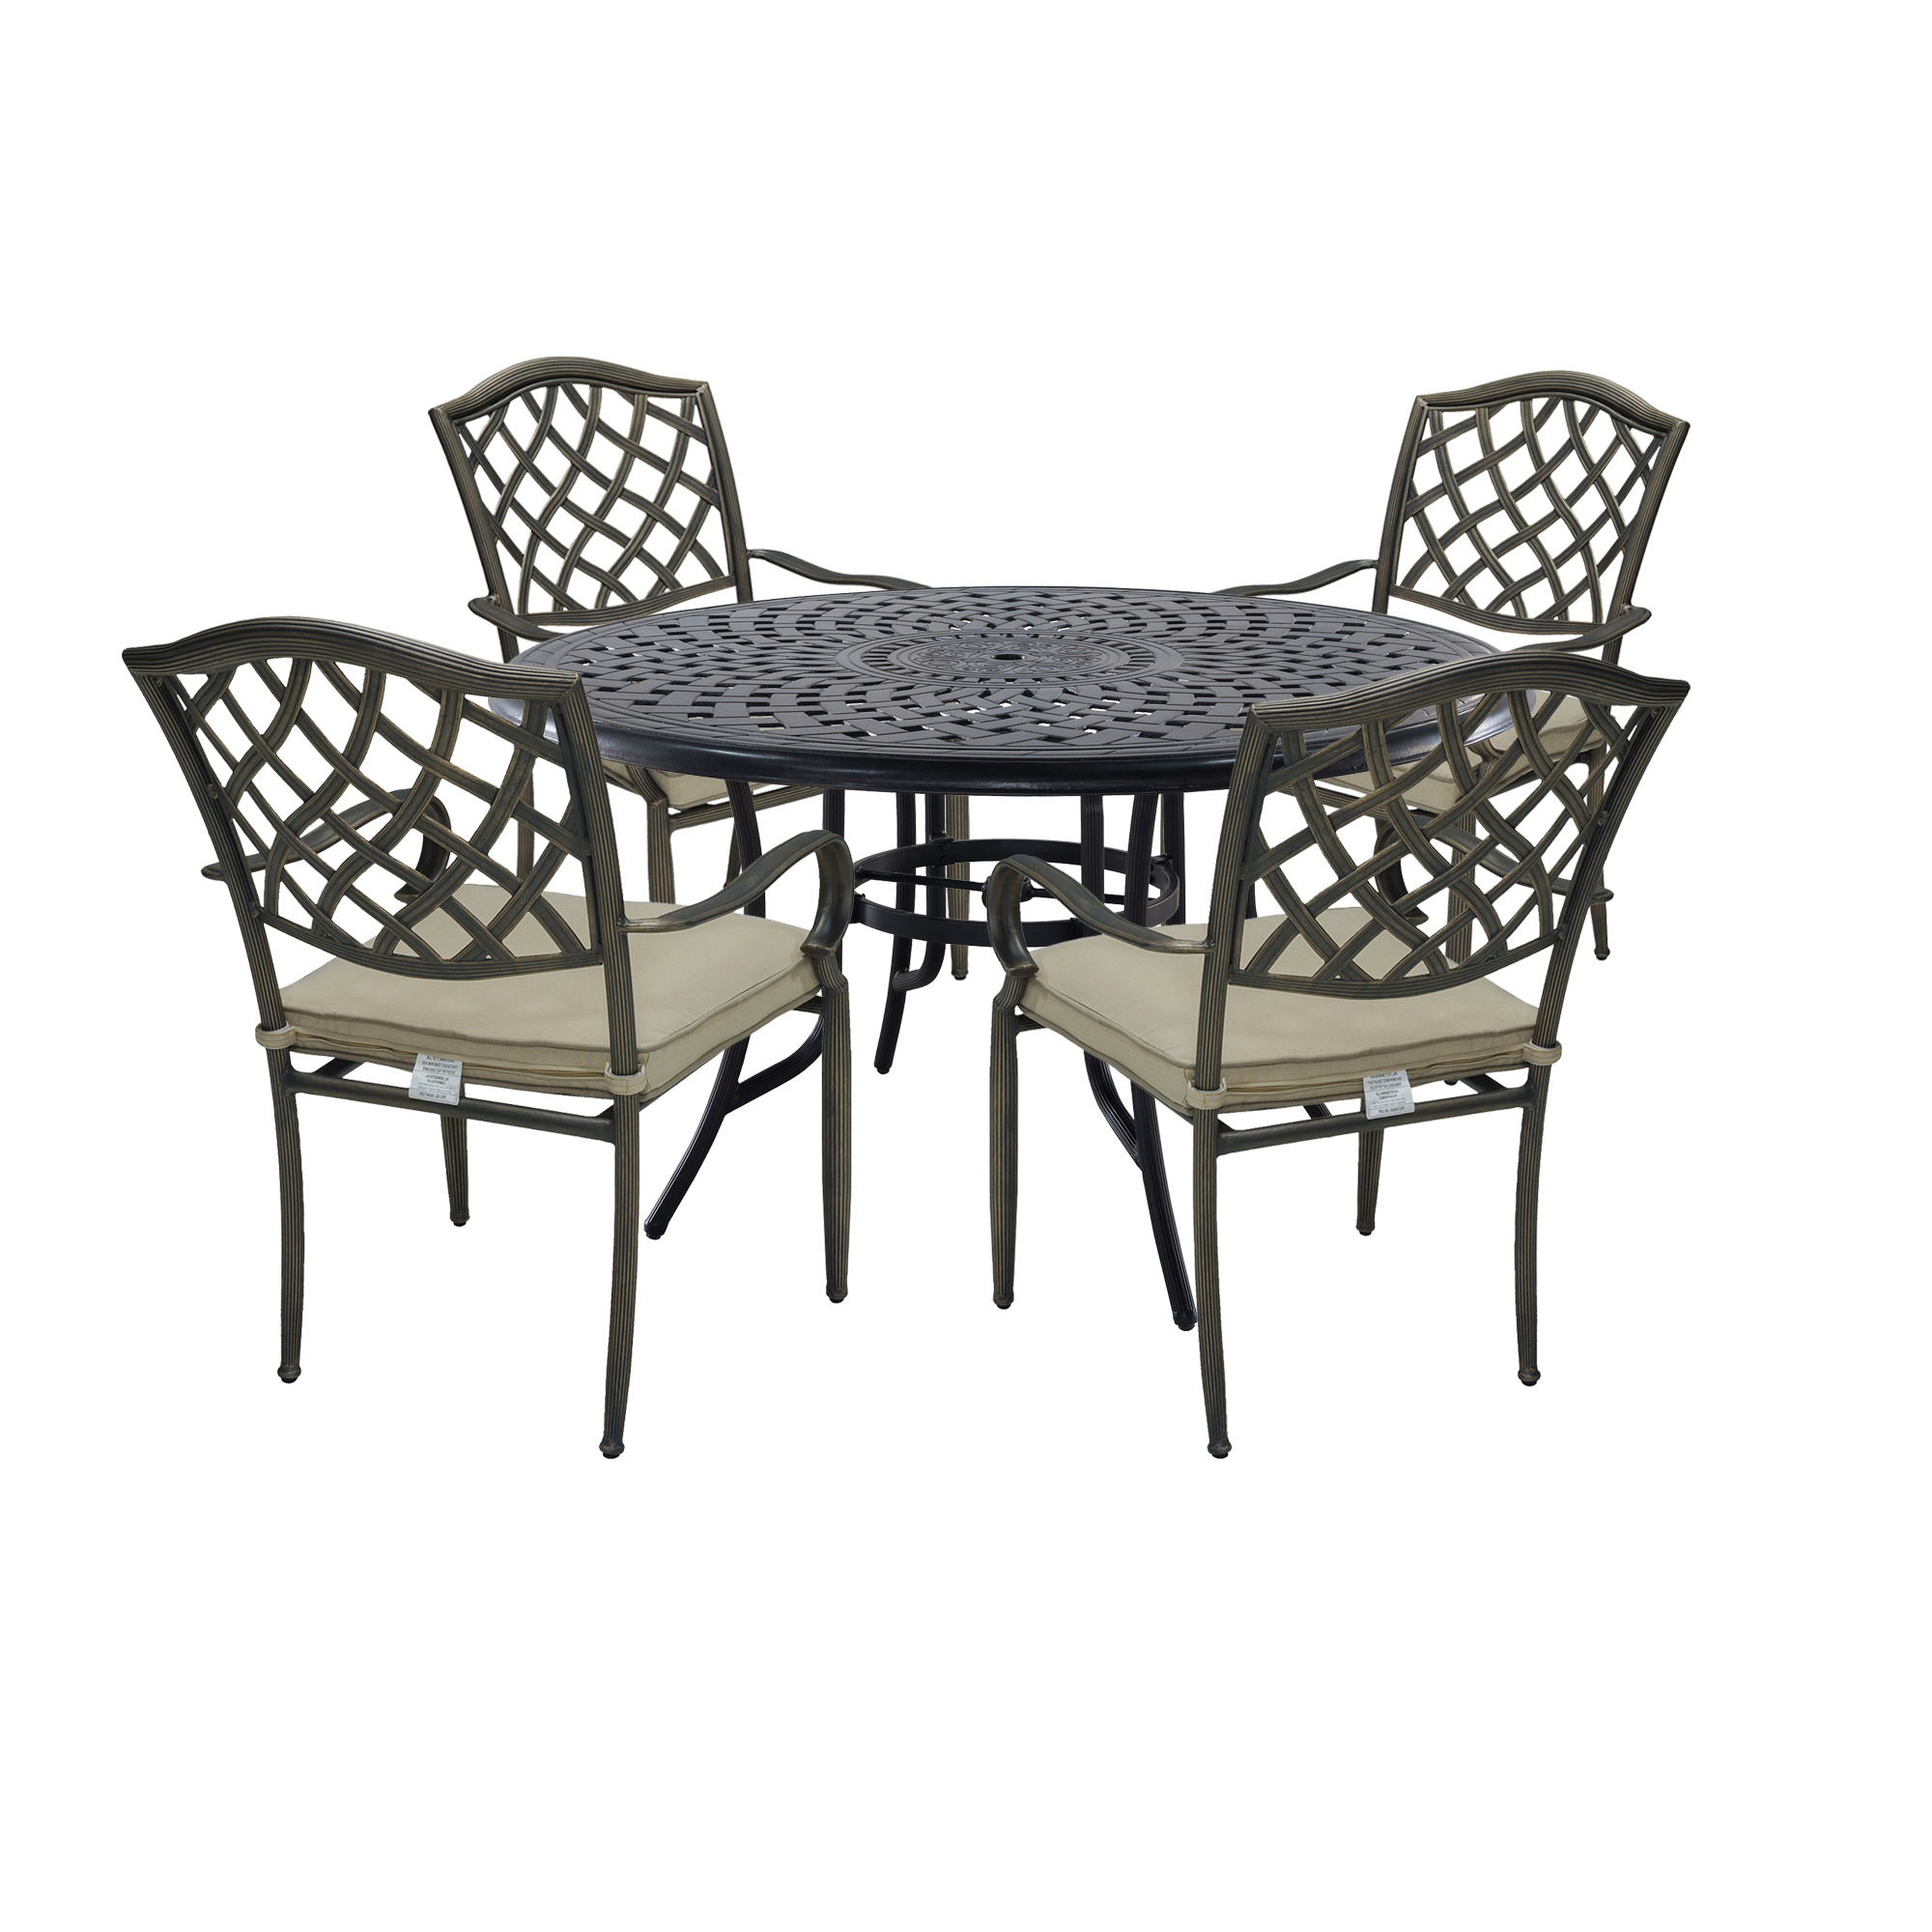 Cast Aluminum 5-Piece Outdoor Patio Dining Set with Table and Chairs